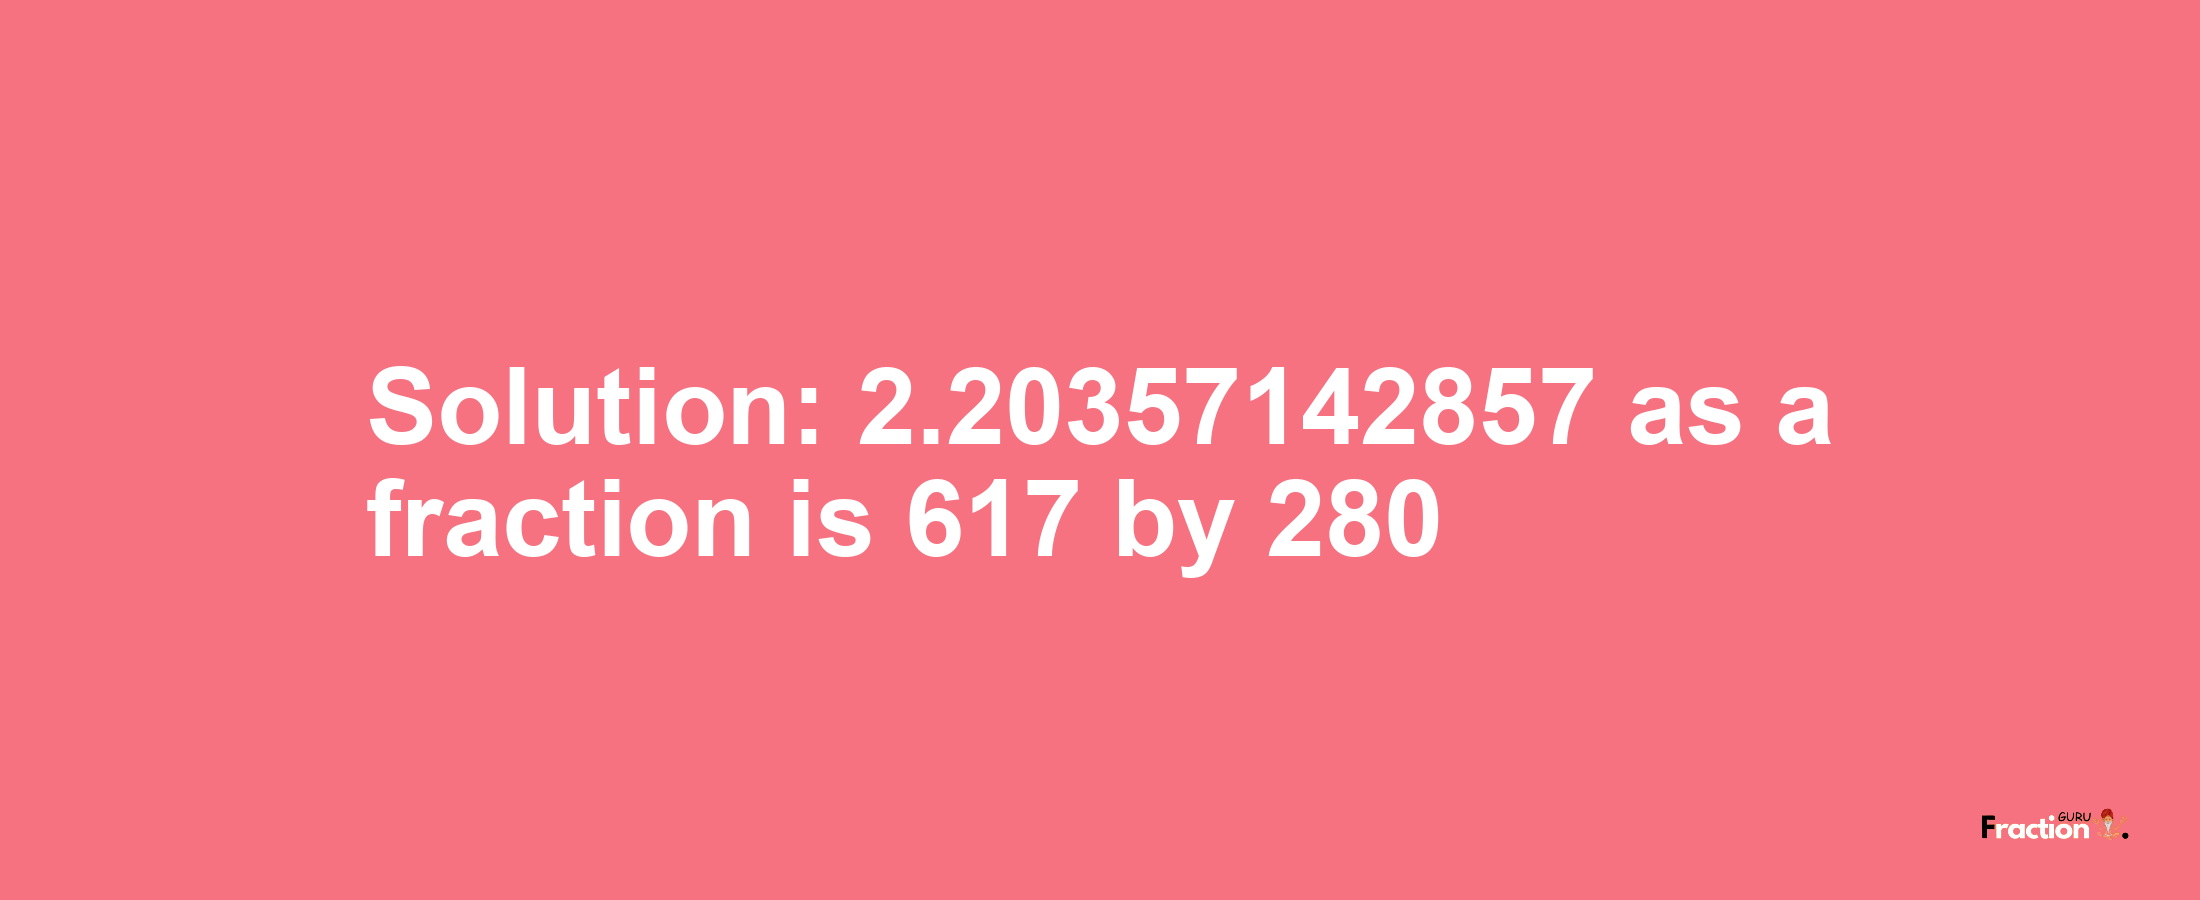 Solution:2.20357142857 as a fraction is 617/280